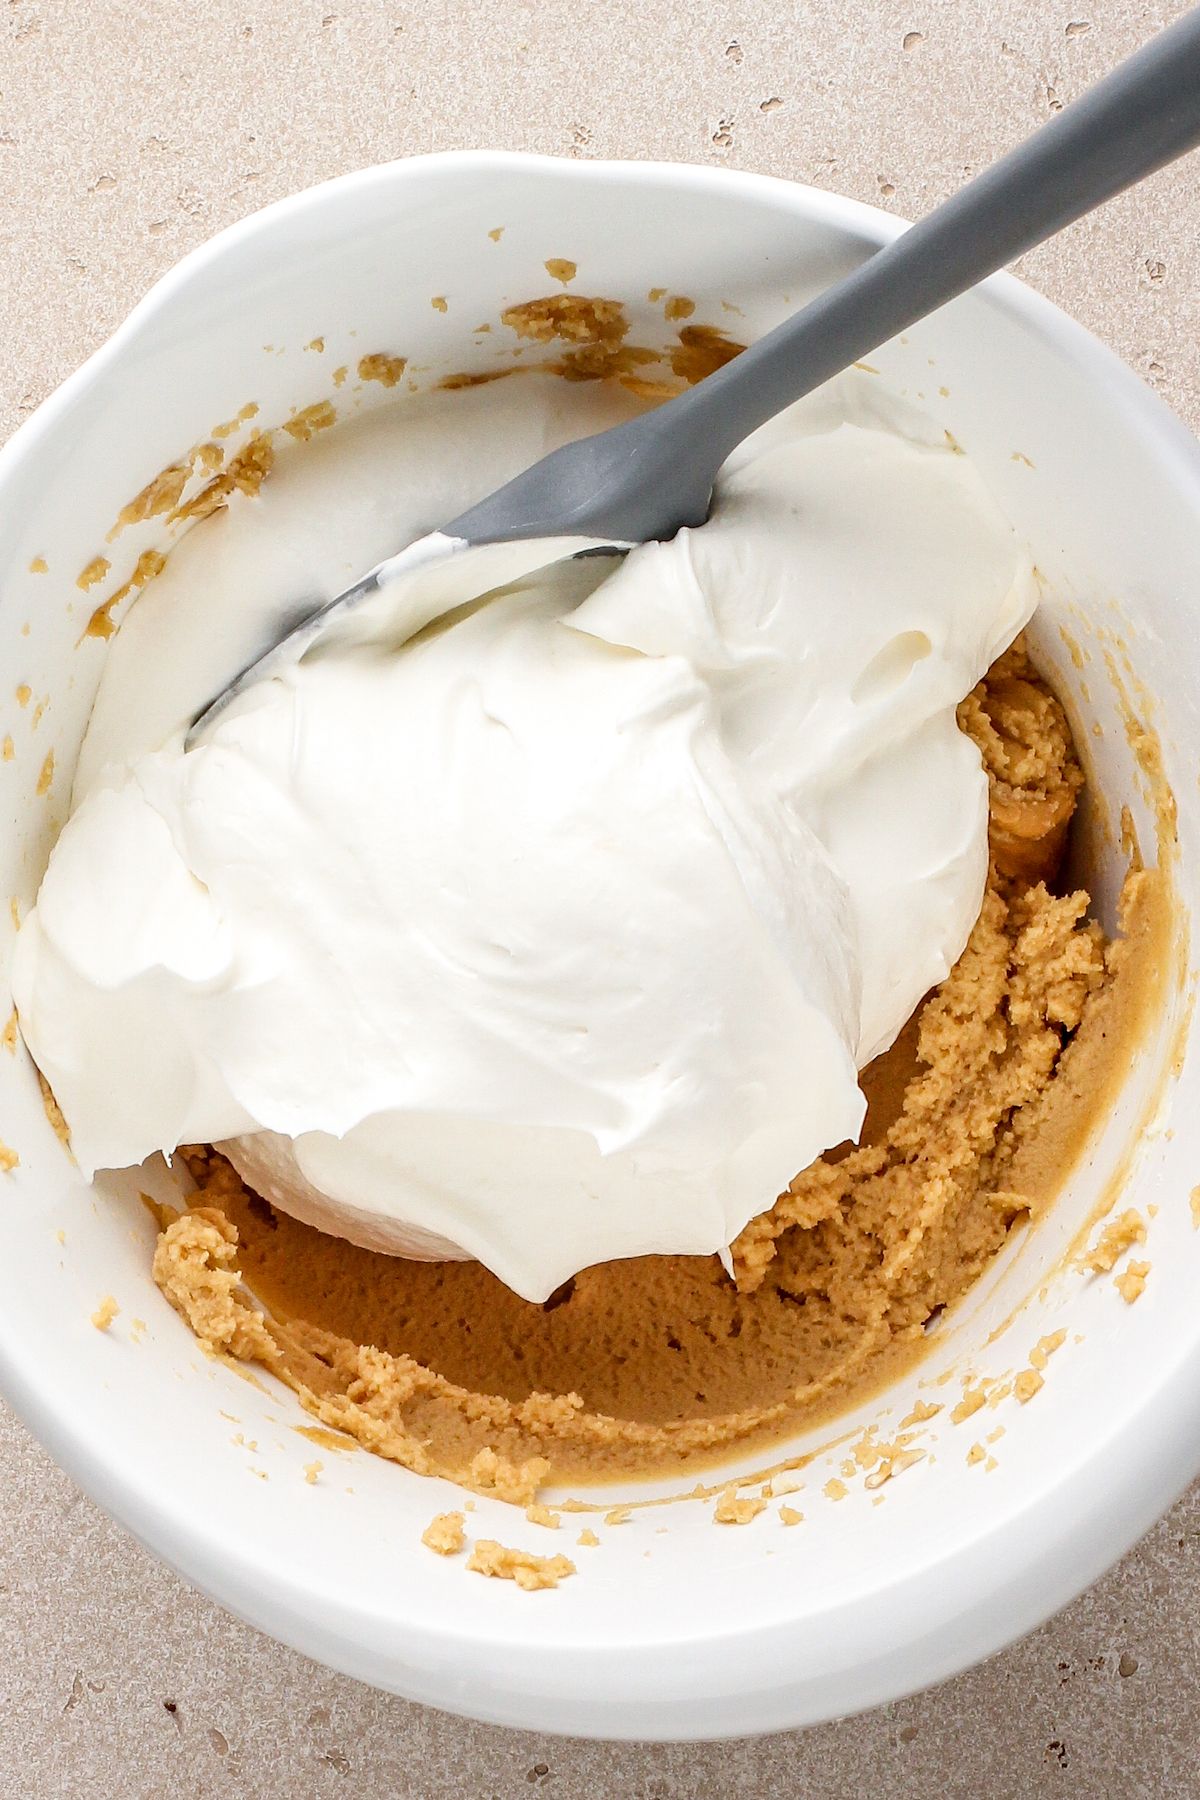 Folding whipped cream into peanut butter filling.